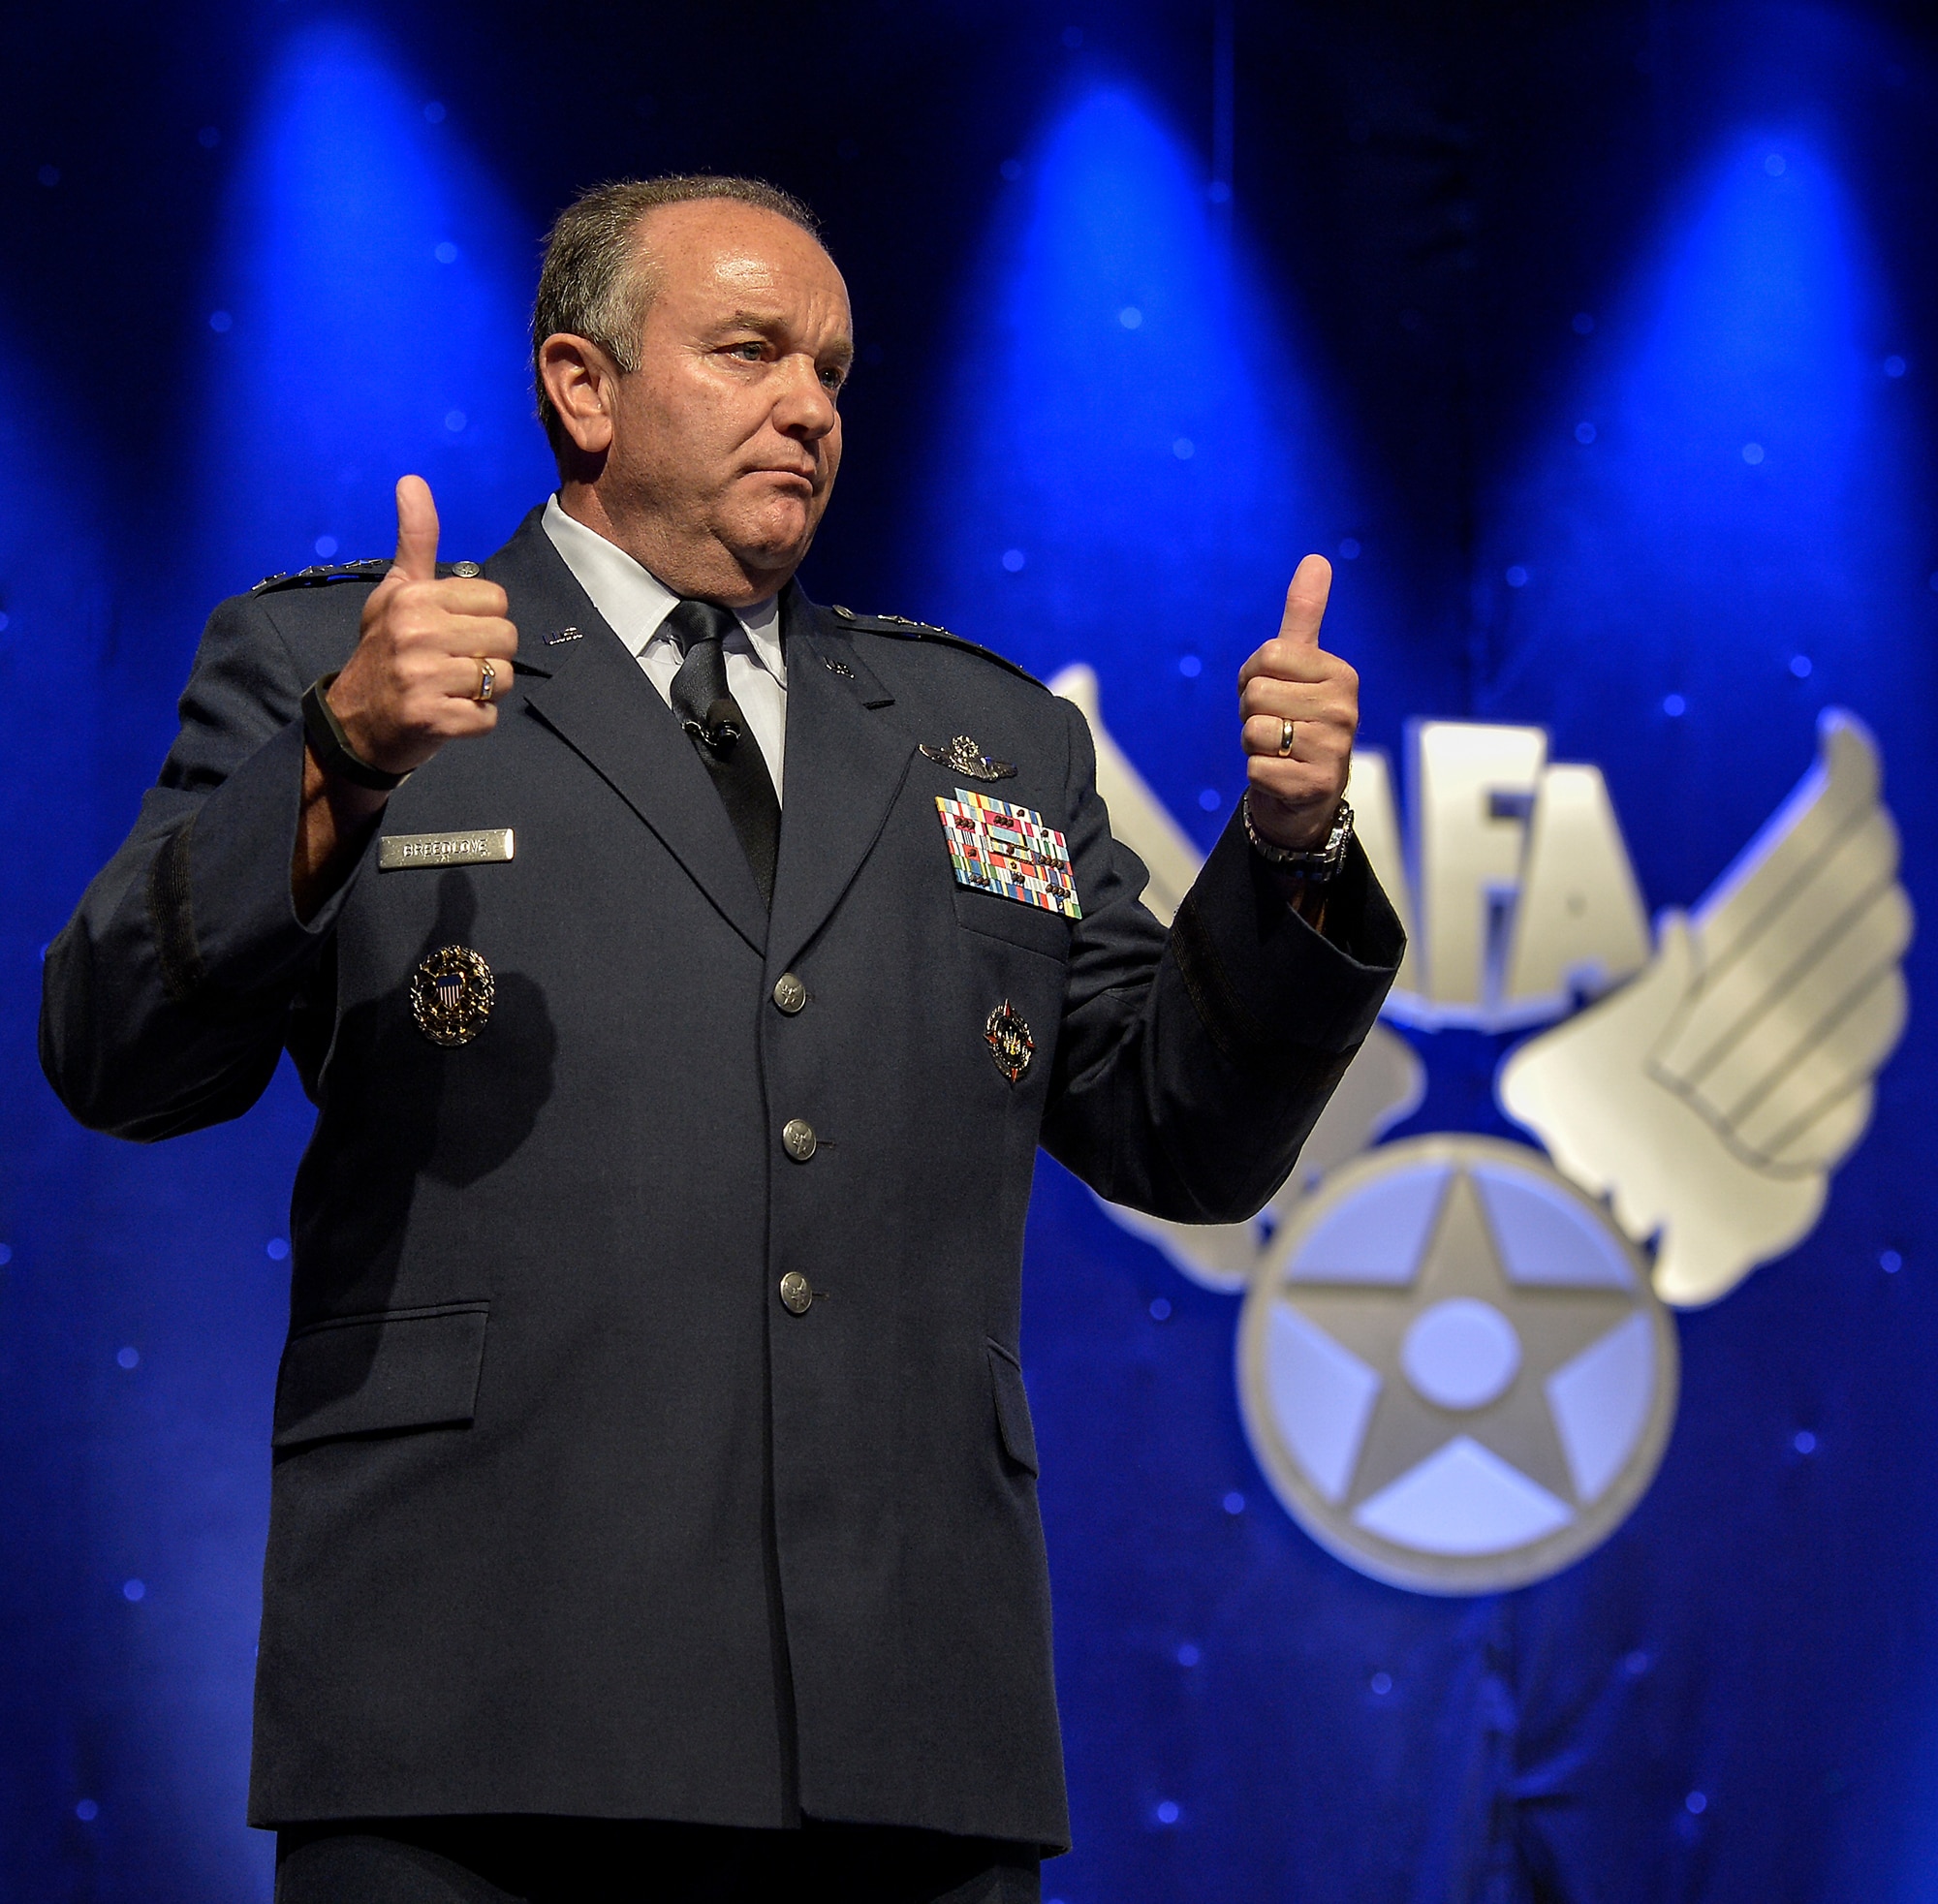 Gen. Phillip Breedlove gives two thumbs up while discussing the positive level of cooperation and interdependence that the air and ground forces of the NATO currently enjoy. The persentation was part of the 2014 Air Force Association's Air & Space Conference and Technology Exposition in Washington D.C. on September 15, 2014. Breedlove is the supreme allied commander,  Europe, and commander of U.S. European Command. (U.S. Air  Force photo/Michael J. Pausic)